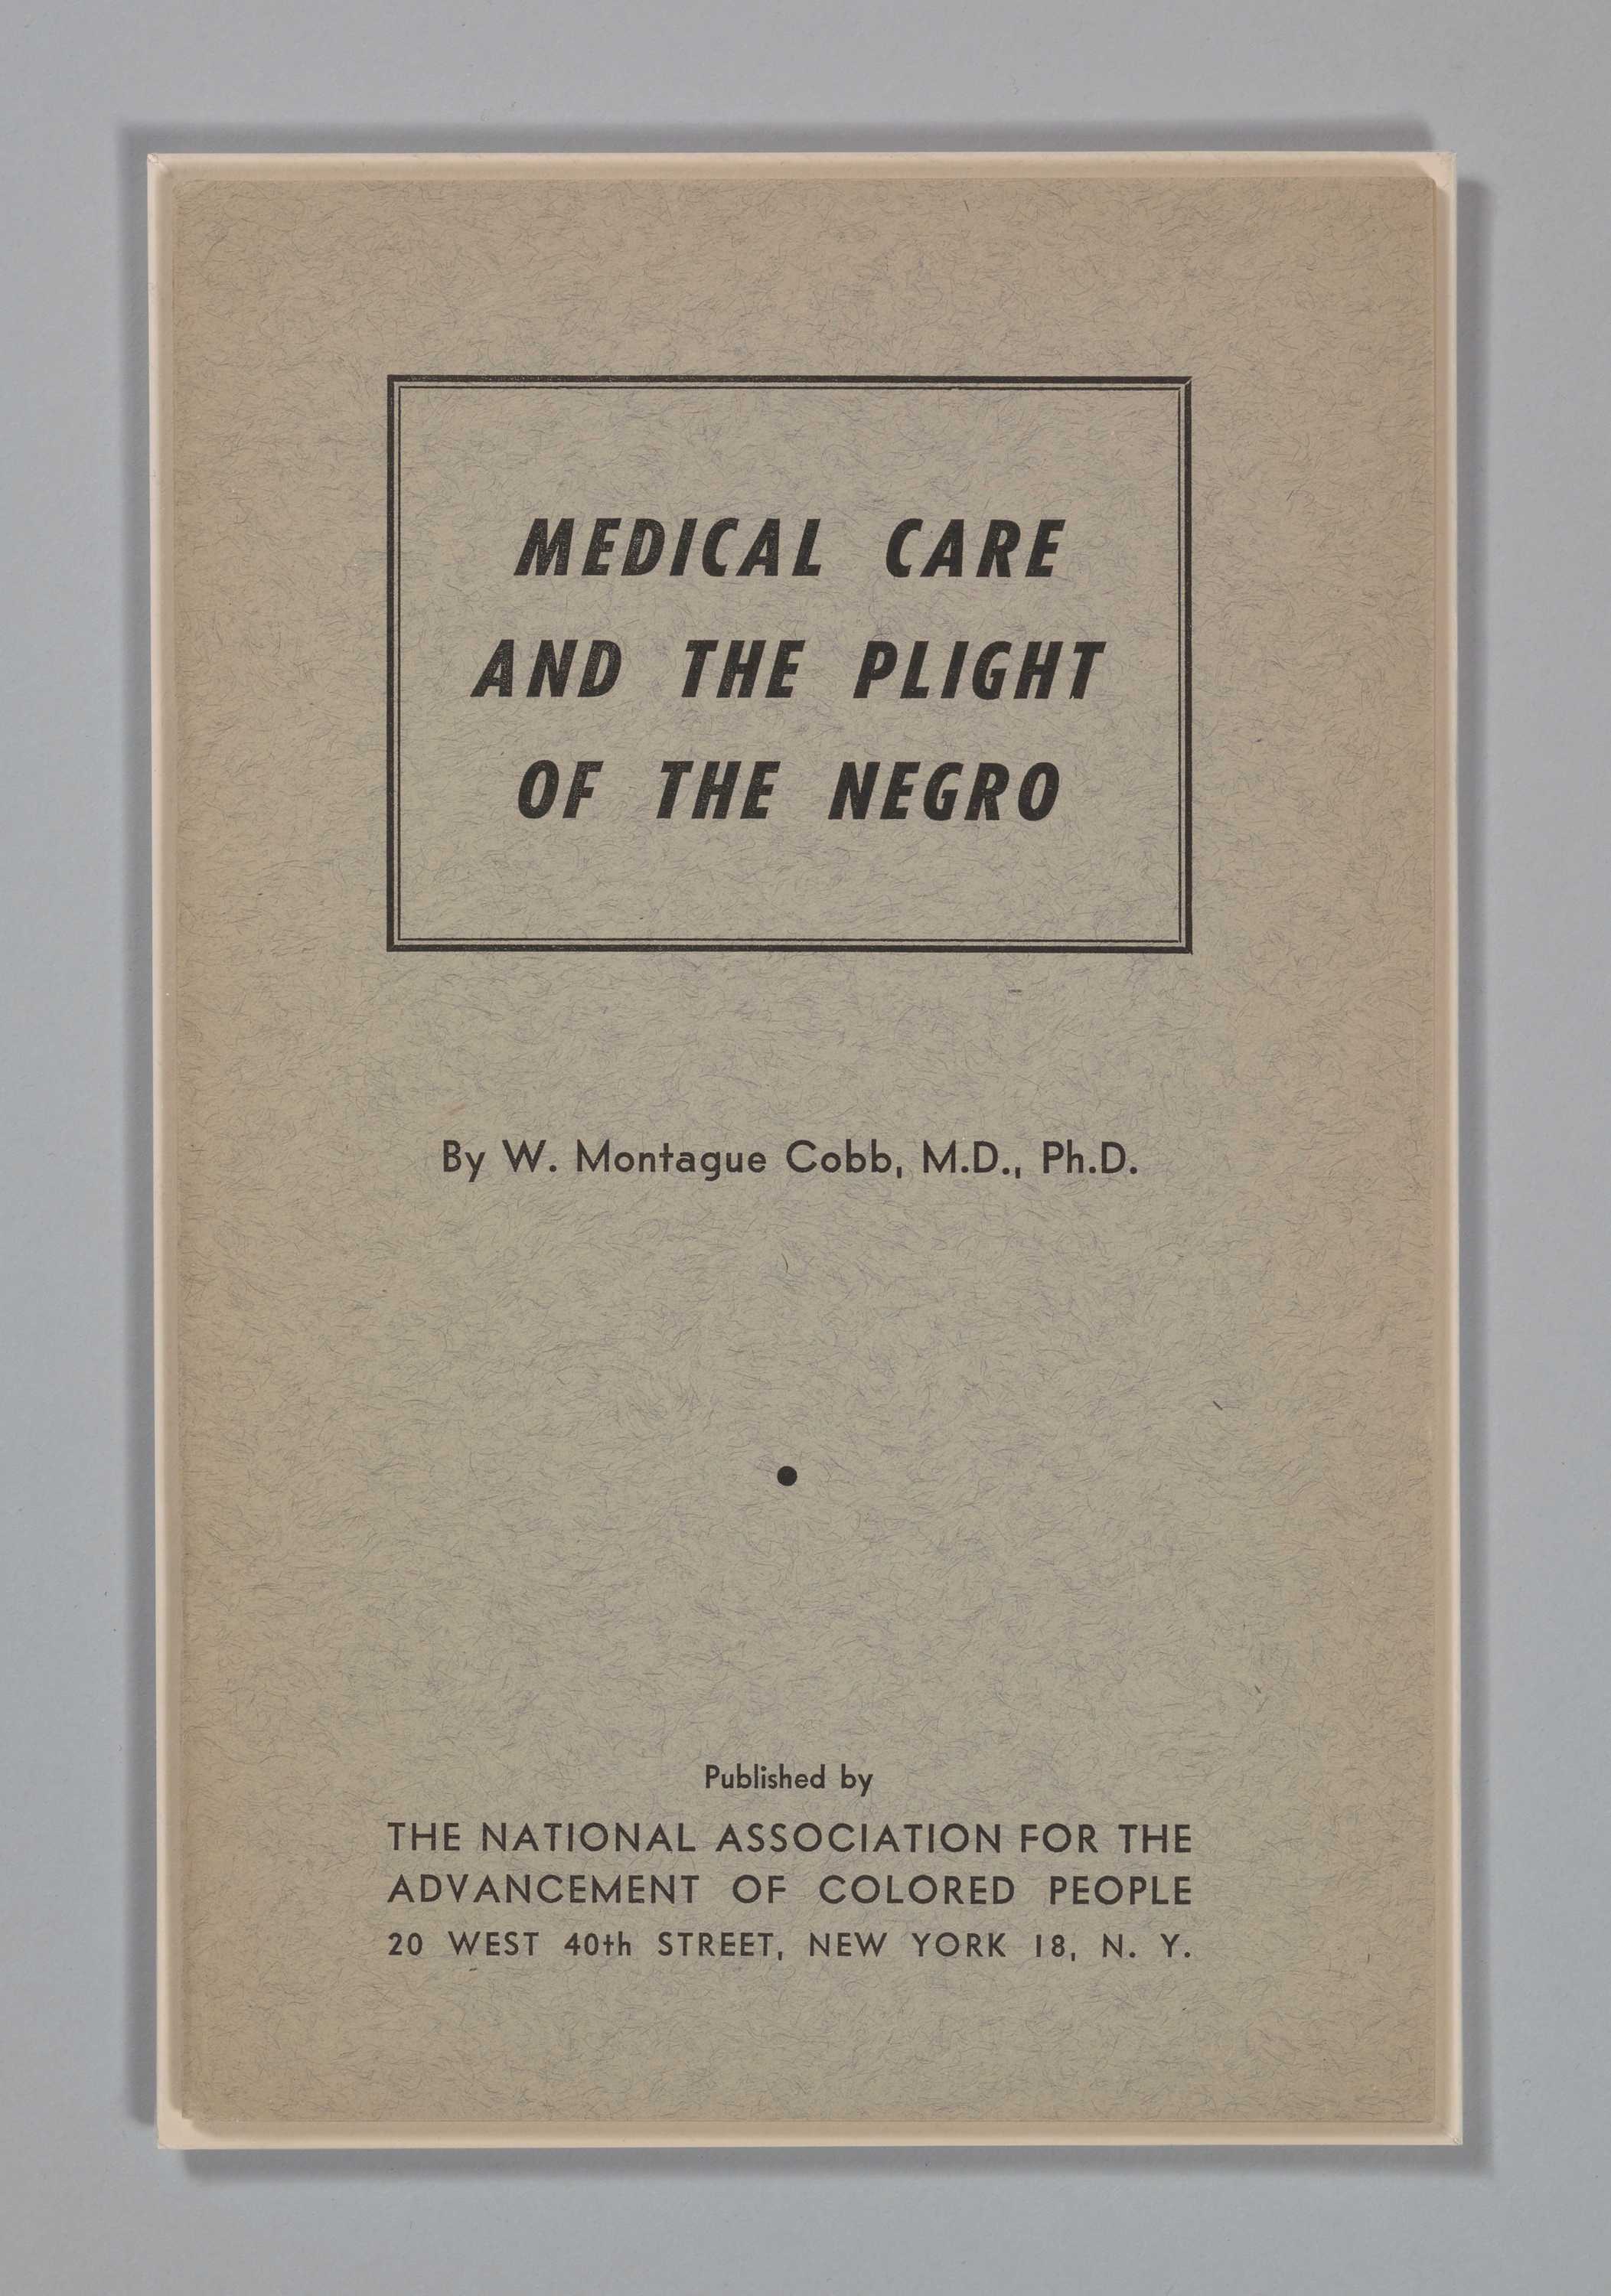 A gray-colored booklet with black san-serif typeface in all capitals that read: Medical Care and the Plight of the Negro.